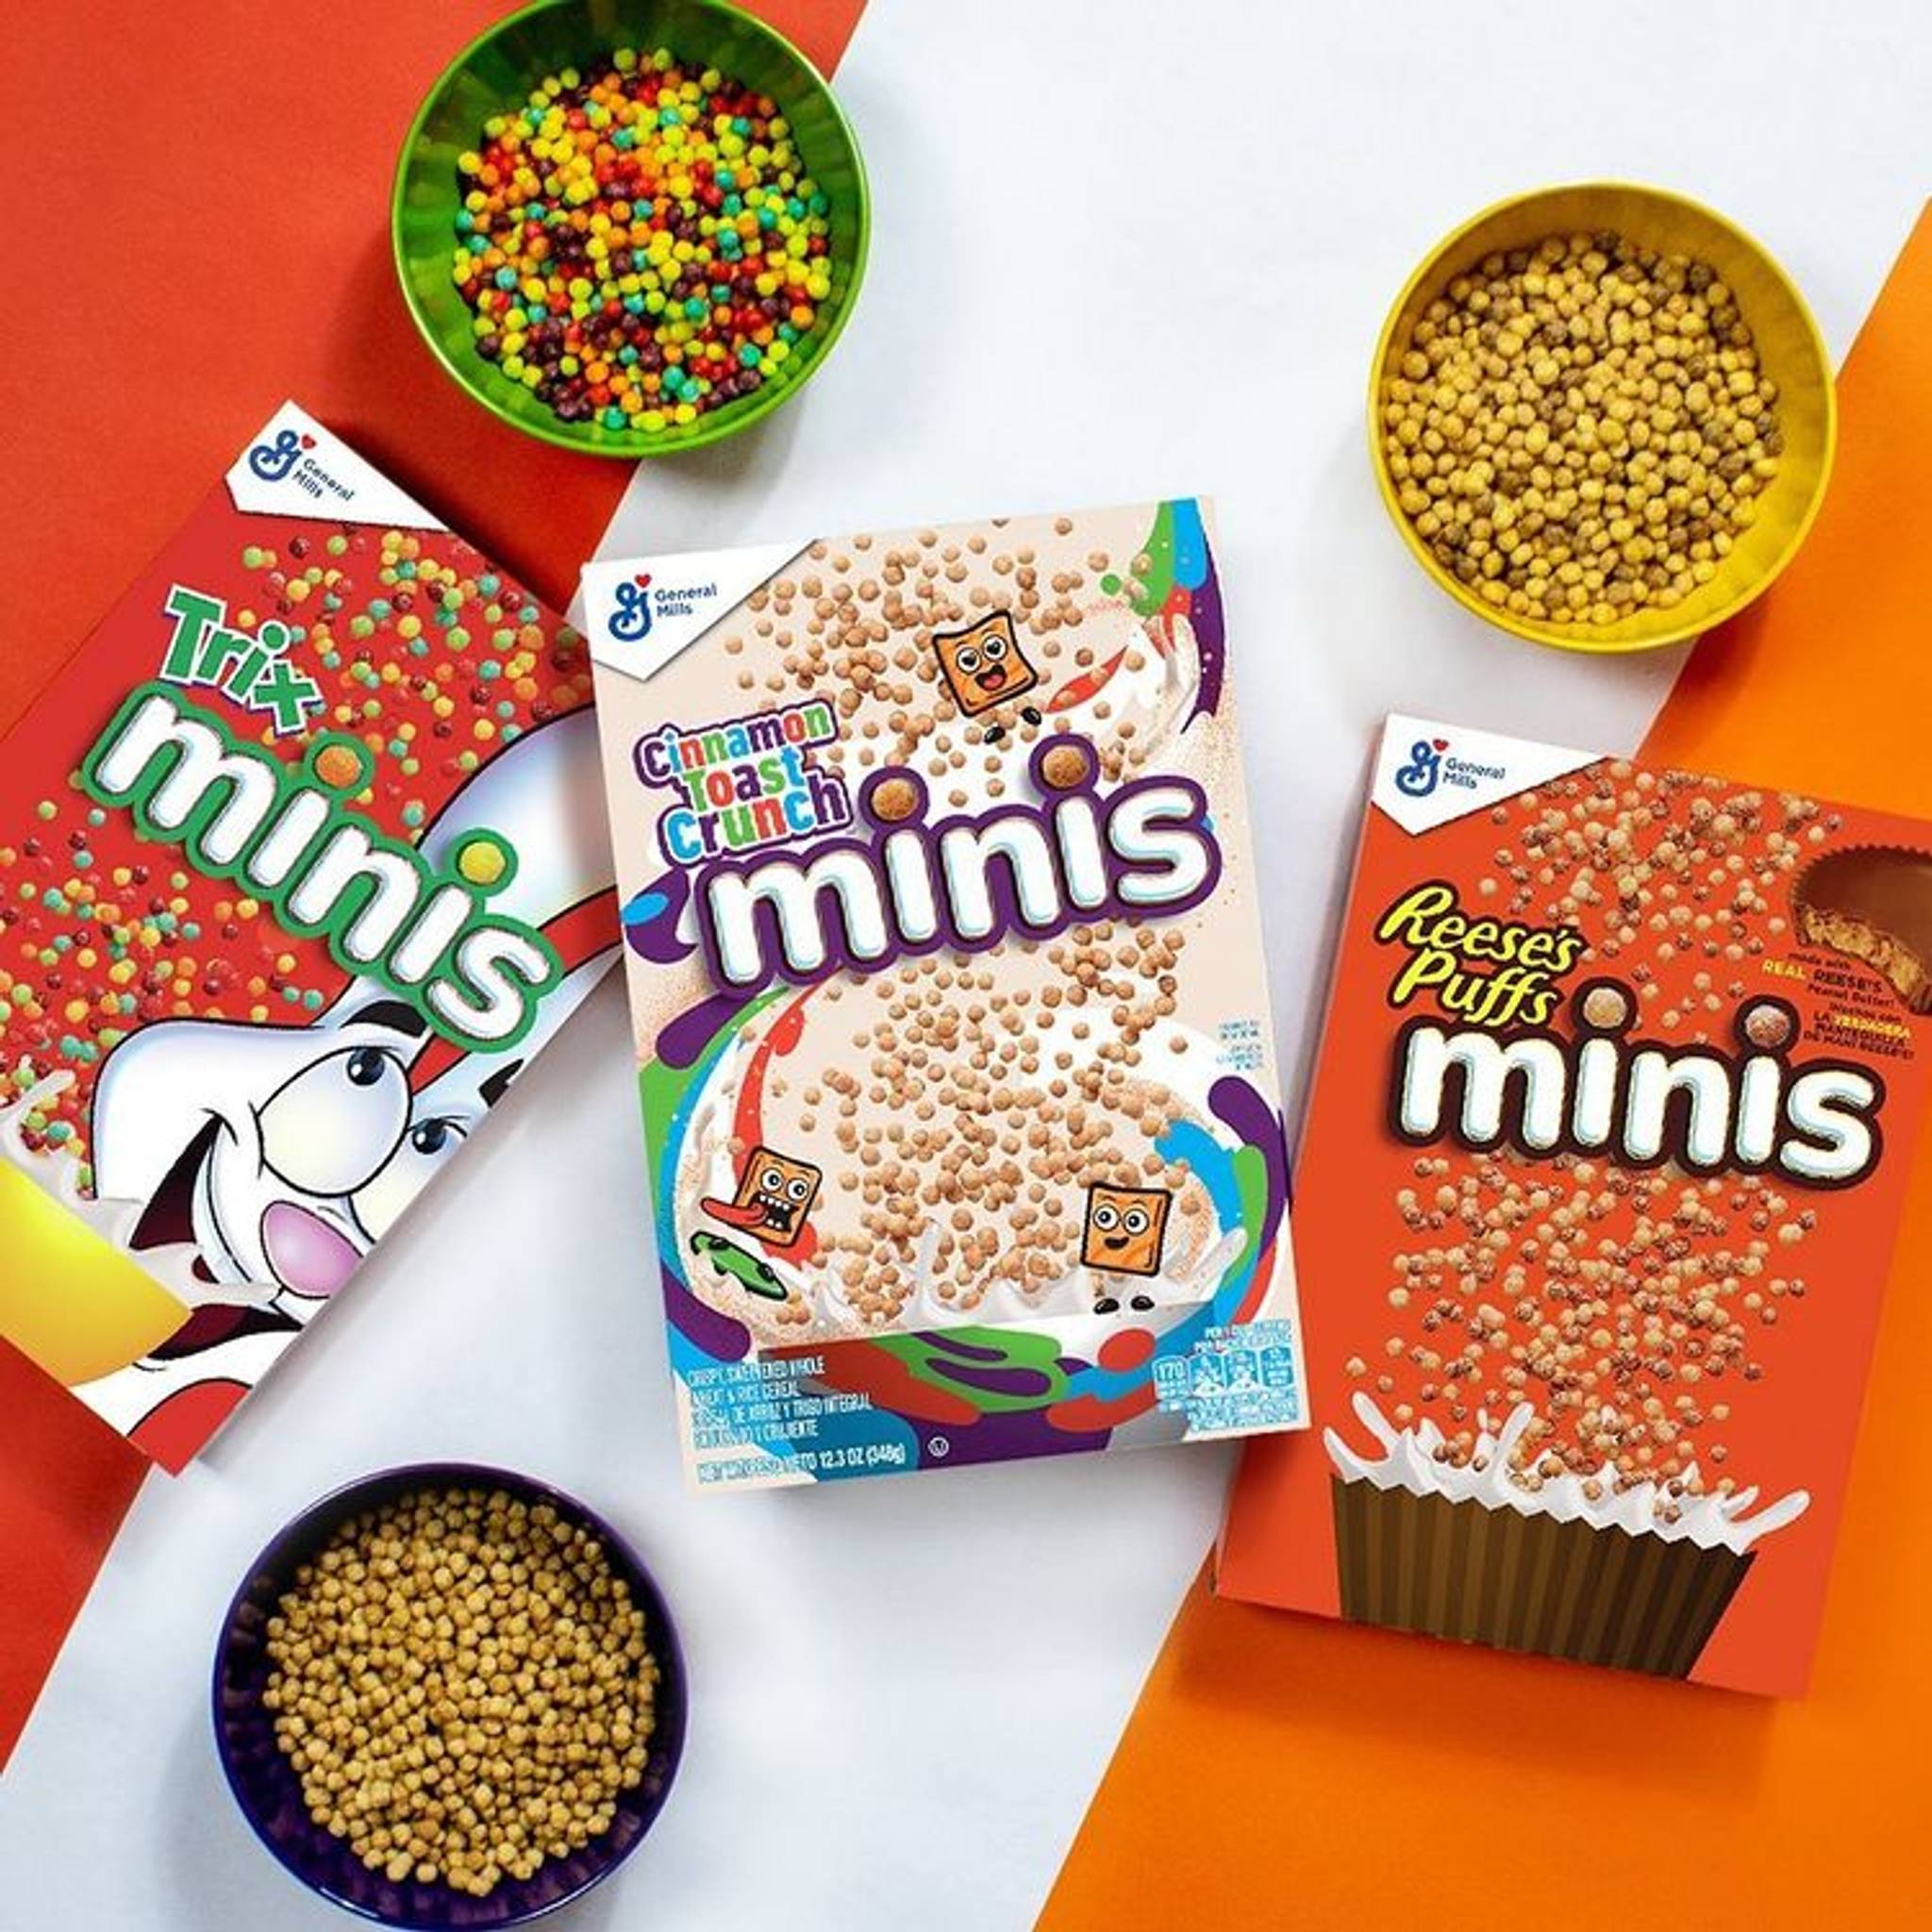 Mini cereals feed appetite for health-conscious snacks